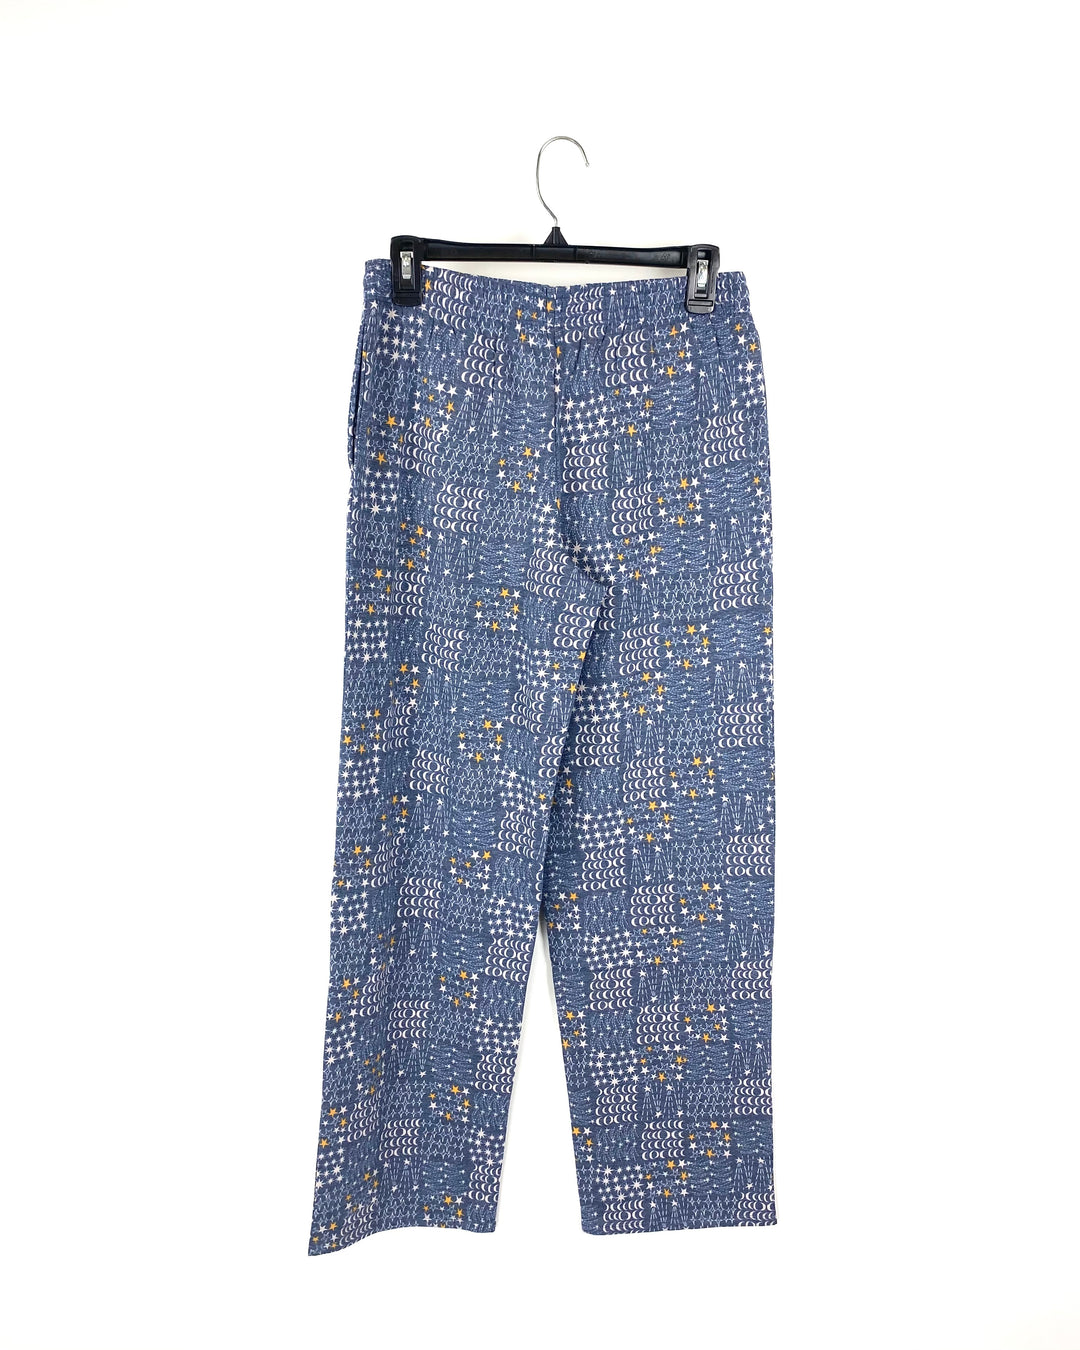 Blue and Yellow Sweatpants - Extra Small and Small